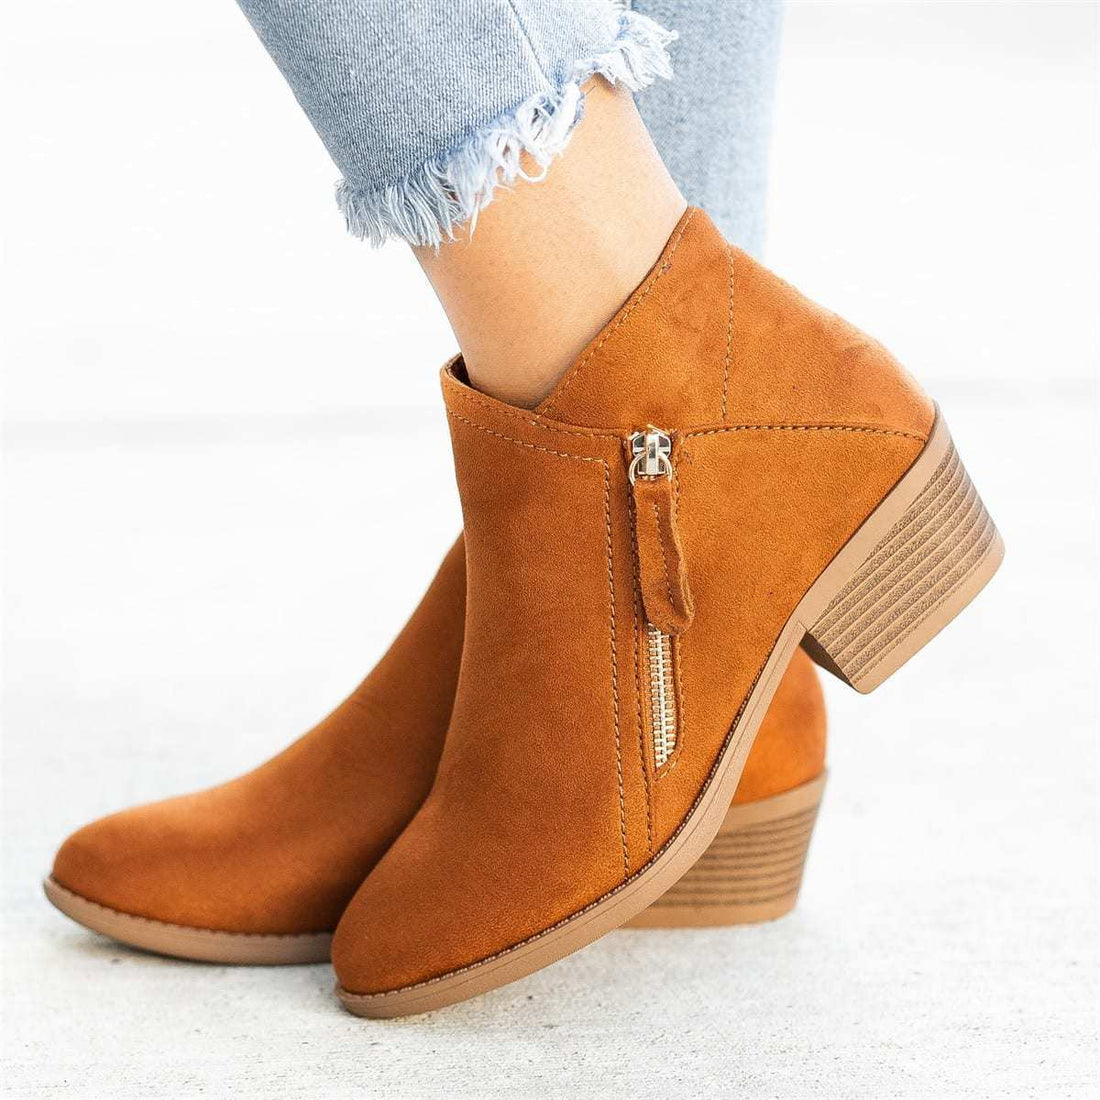 Go West, Suede Style Ankle Boots For Women, Low Heel with Side Zipper